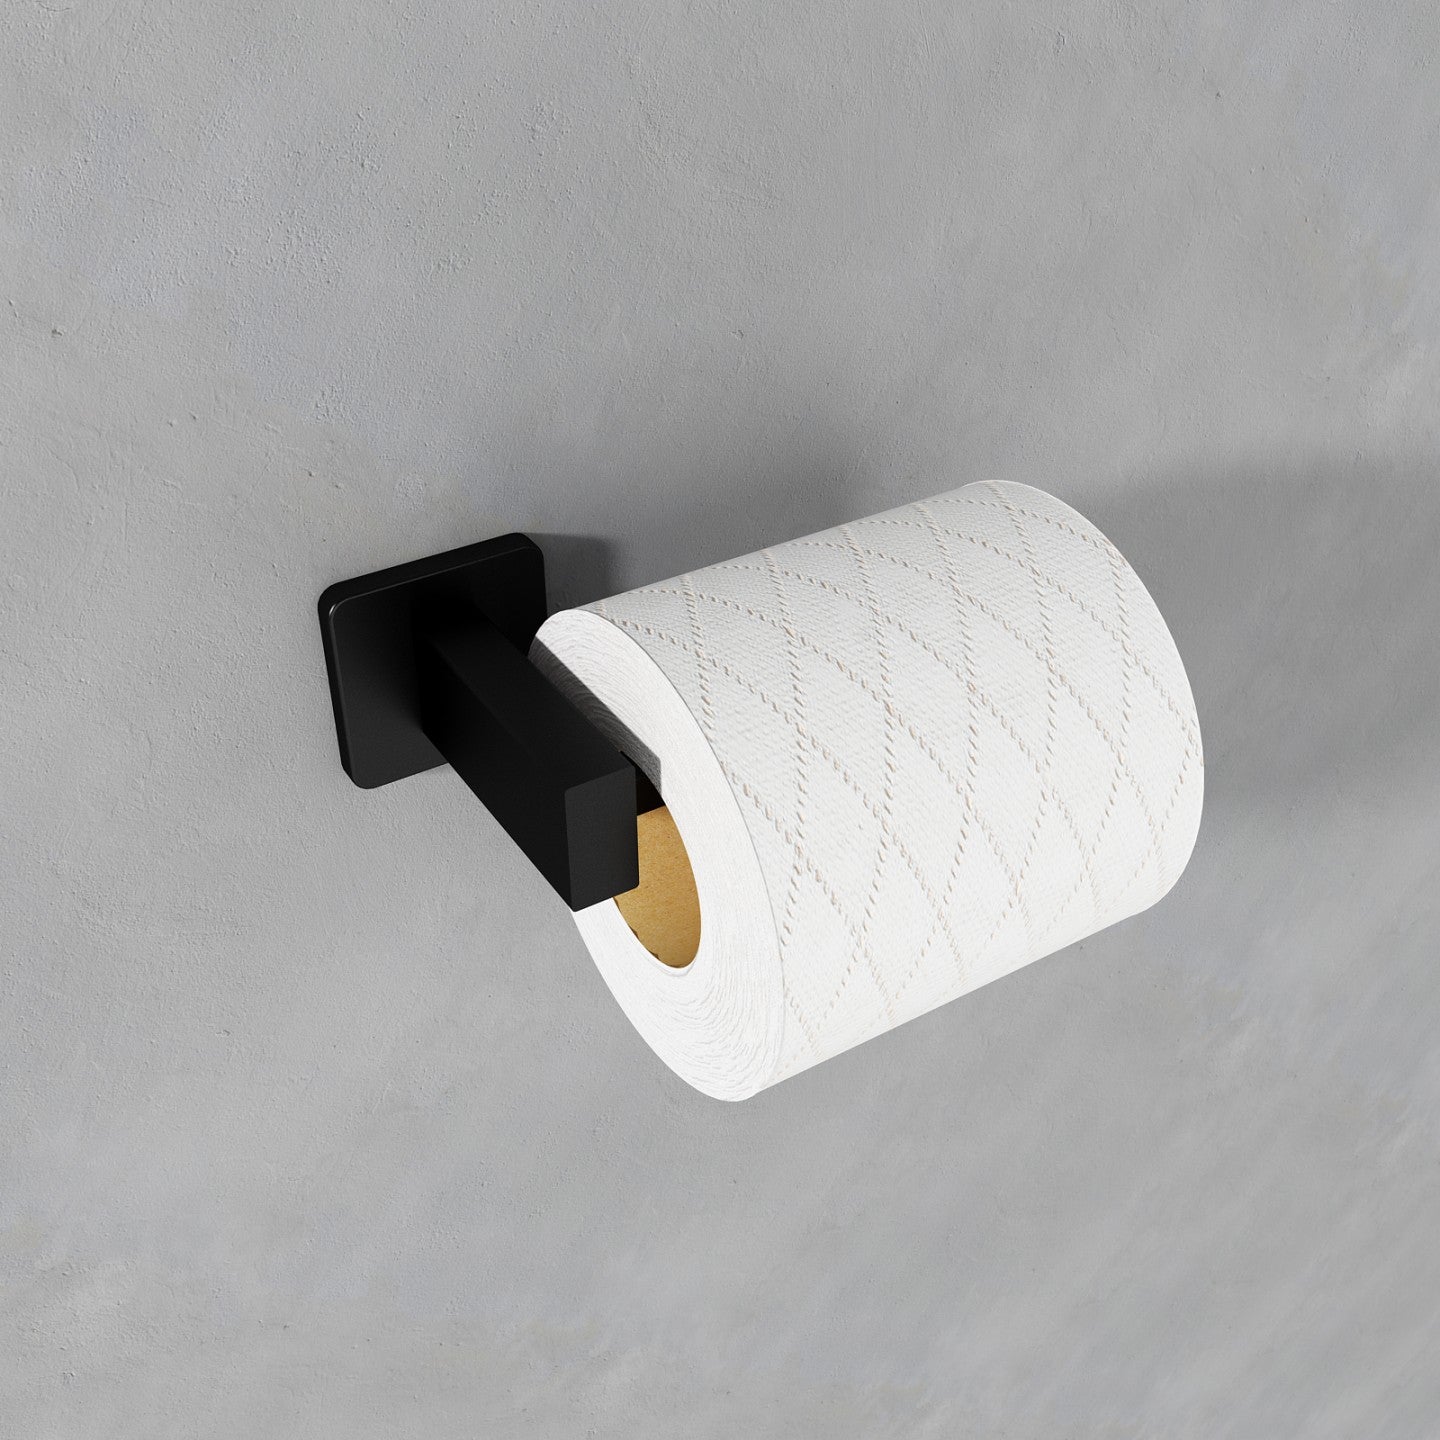 Contemporary black wall-mounted toilet paper holder with a roll of white quilted paper, perfect for modern bathroom aesthetics